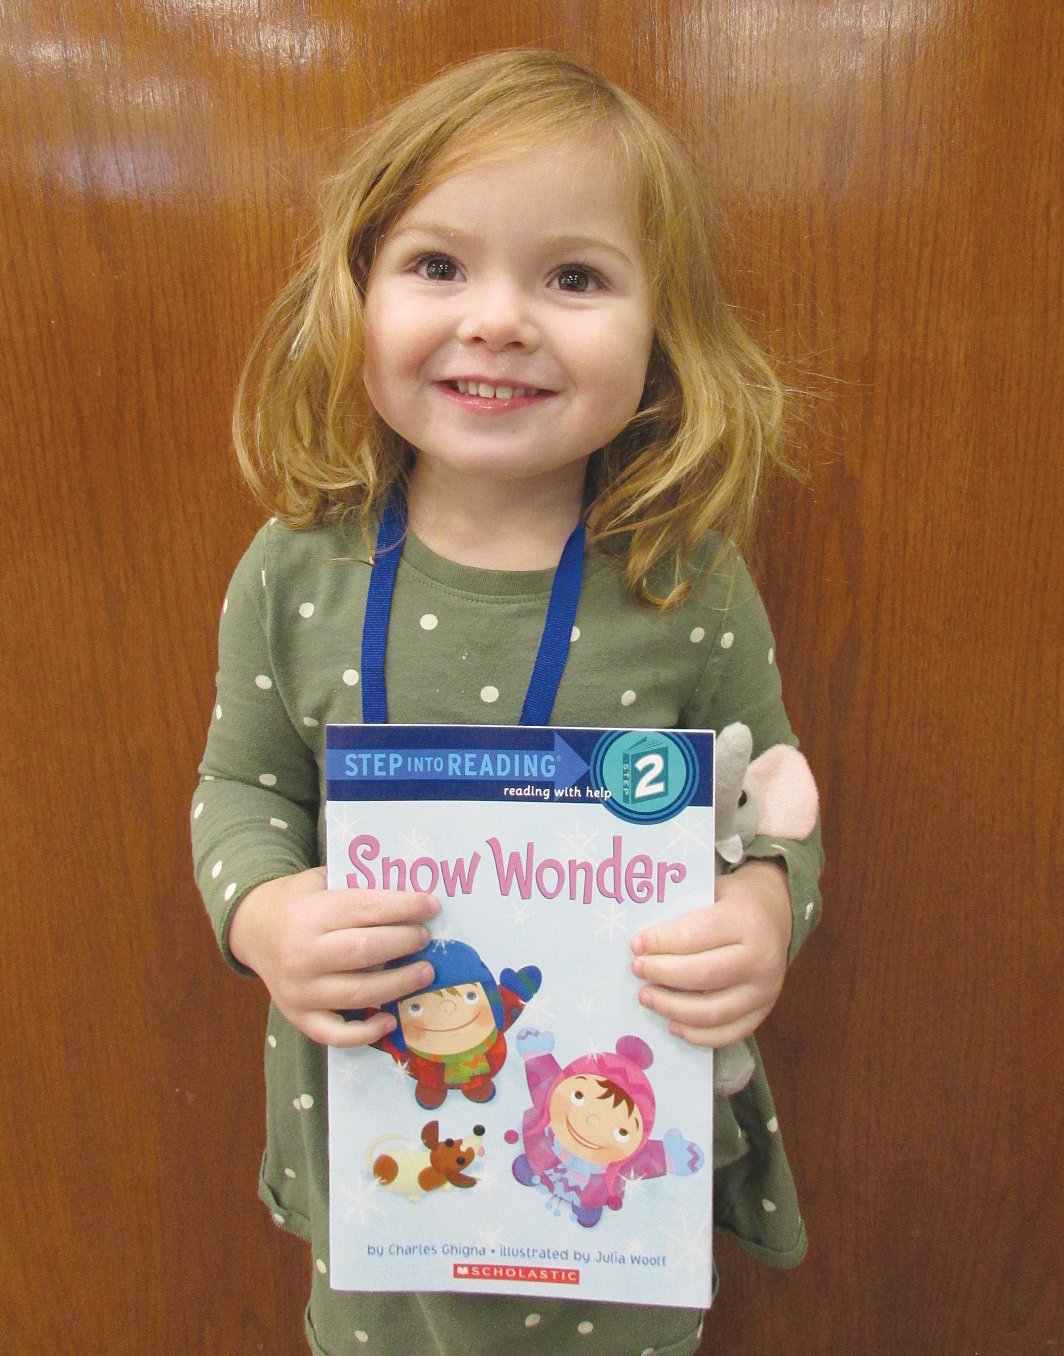 Madison Nichols, age 2, has completed the Crawfordsville District Public Library program,1,000 Books Before Kindergarten. She is the daughter of Tyler and Mindy Nichols. Madison's favorite book is "Baby Beluga" By Raffi Cavoukian. Mom said, "The reading program has been so much fun. We love ending our days together reading in our favorite spots."